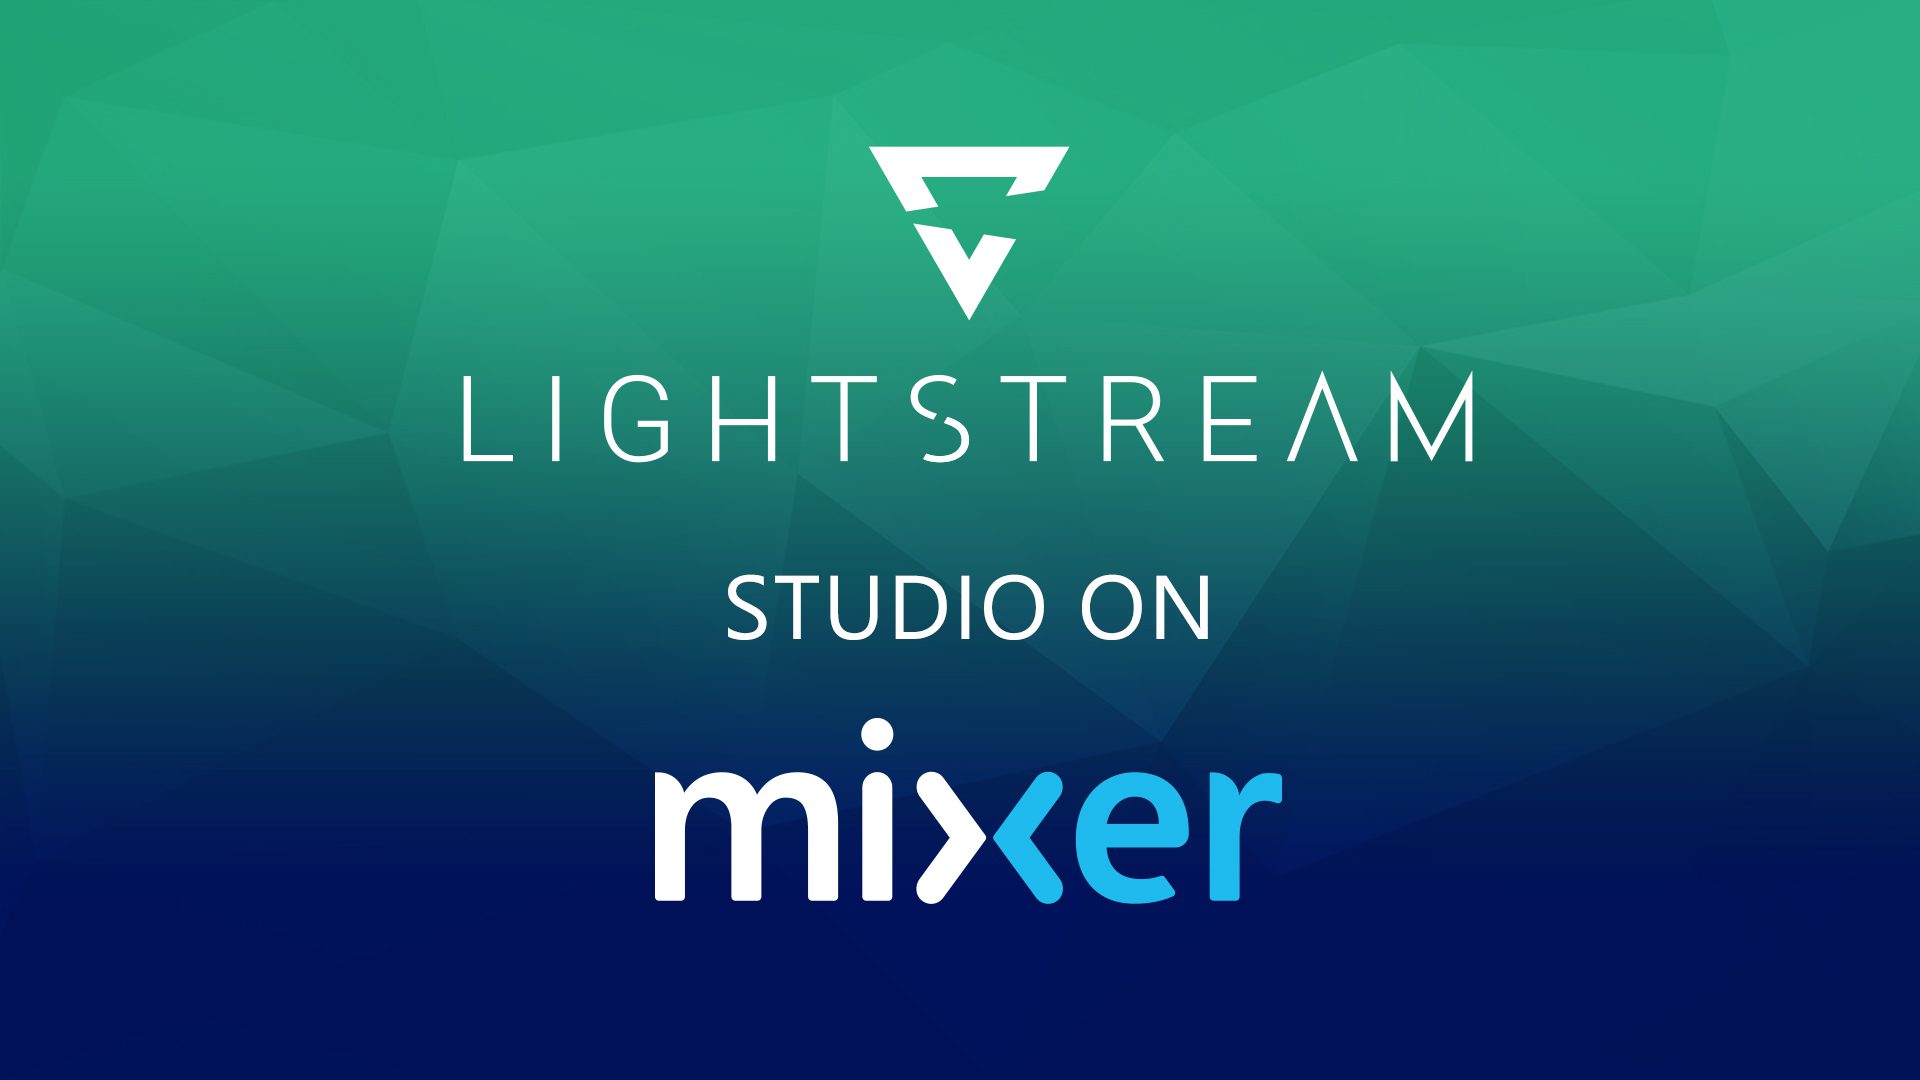 Mixer partners with Lightstream Studio to give streamers more customization options